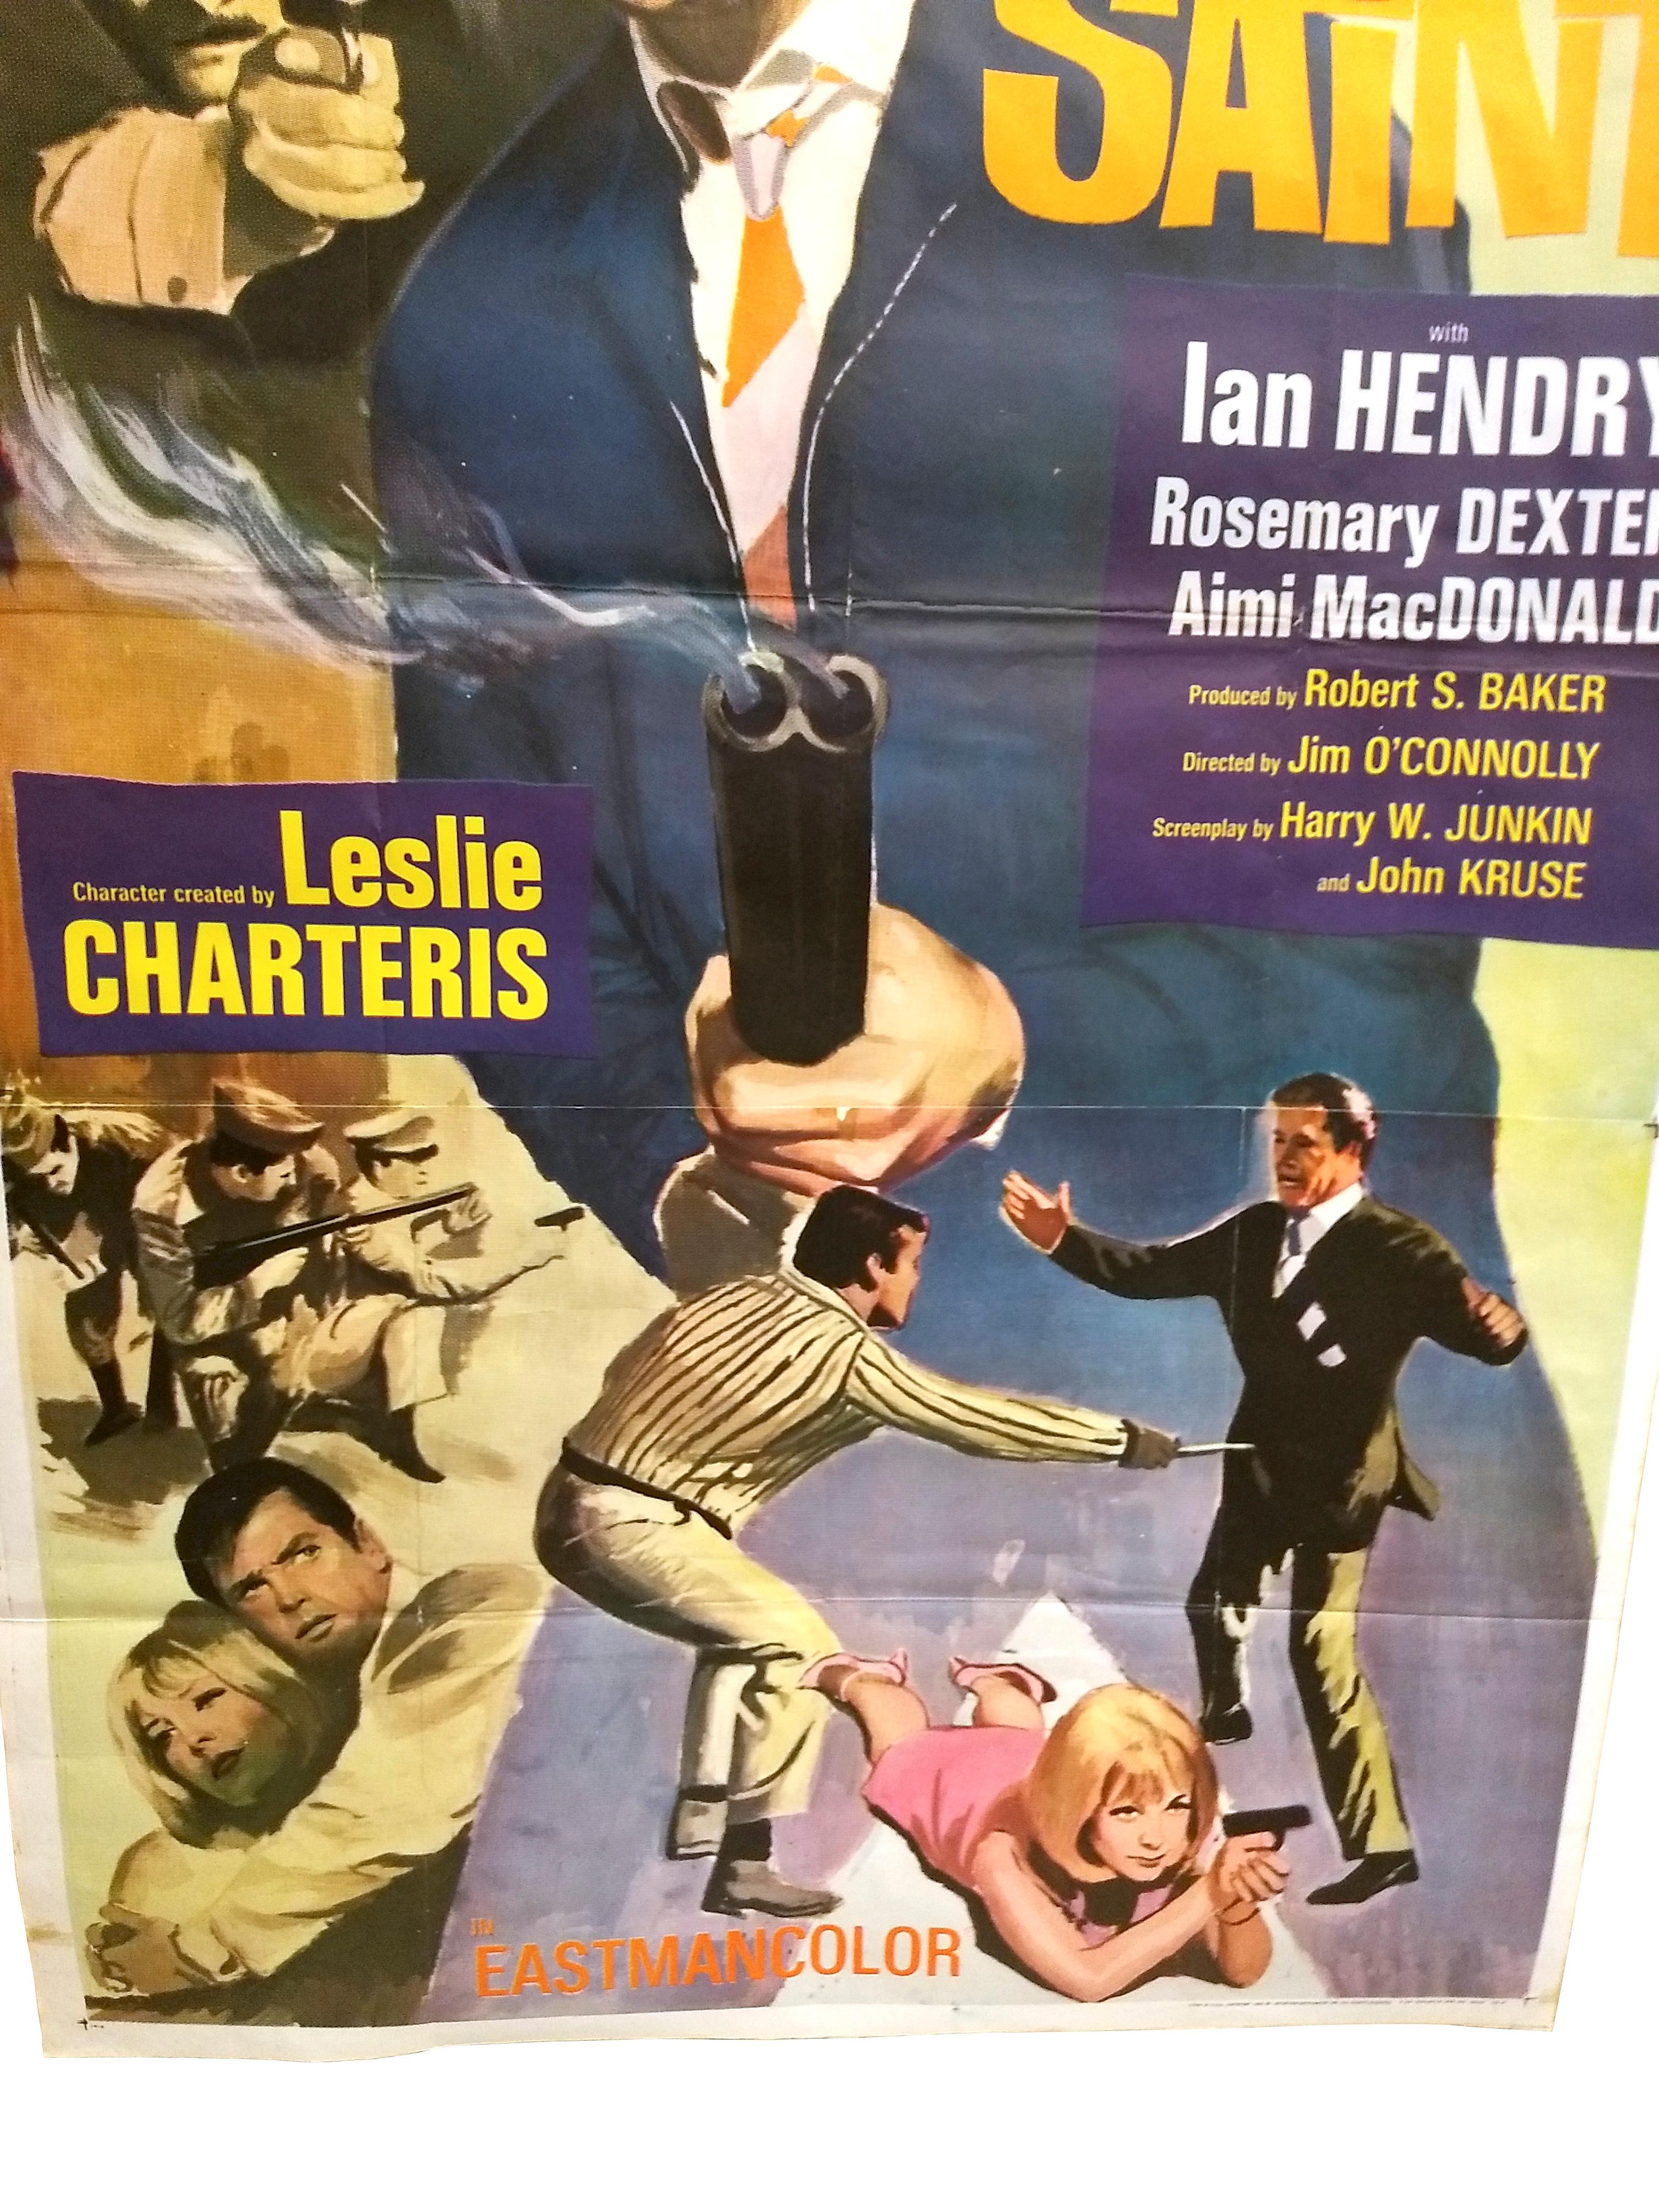 Large advertisement poster for the 1969 action movie 